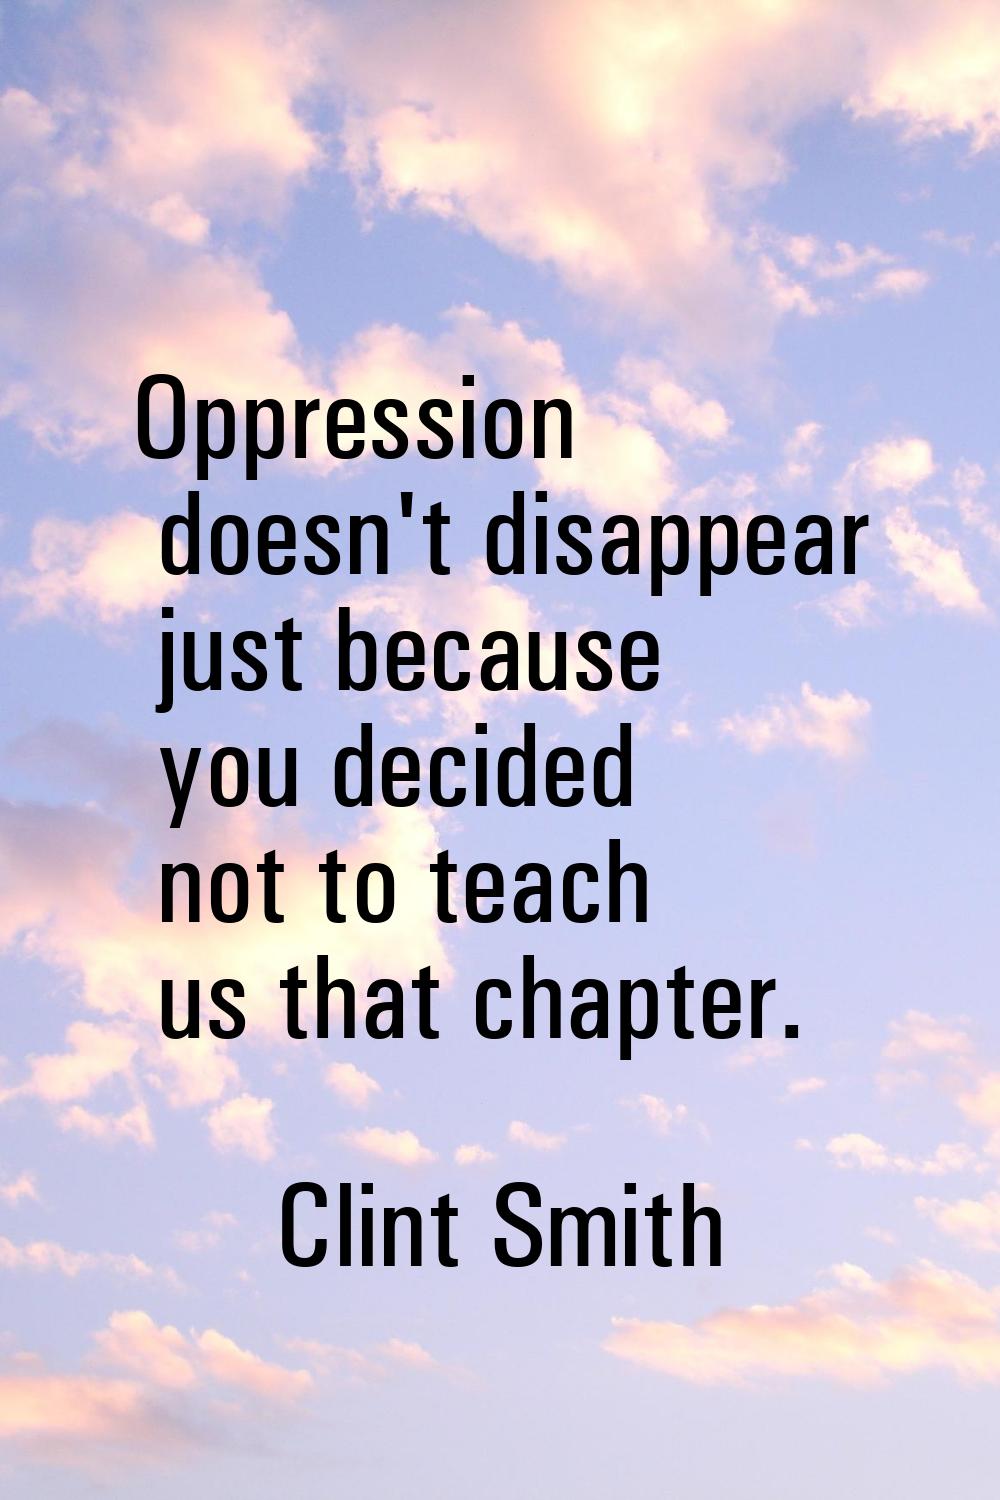 Oppression doesn't disappear just because you decided not to teach us that chapter.